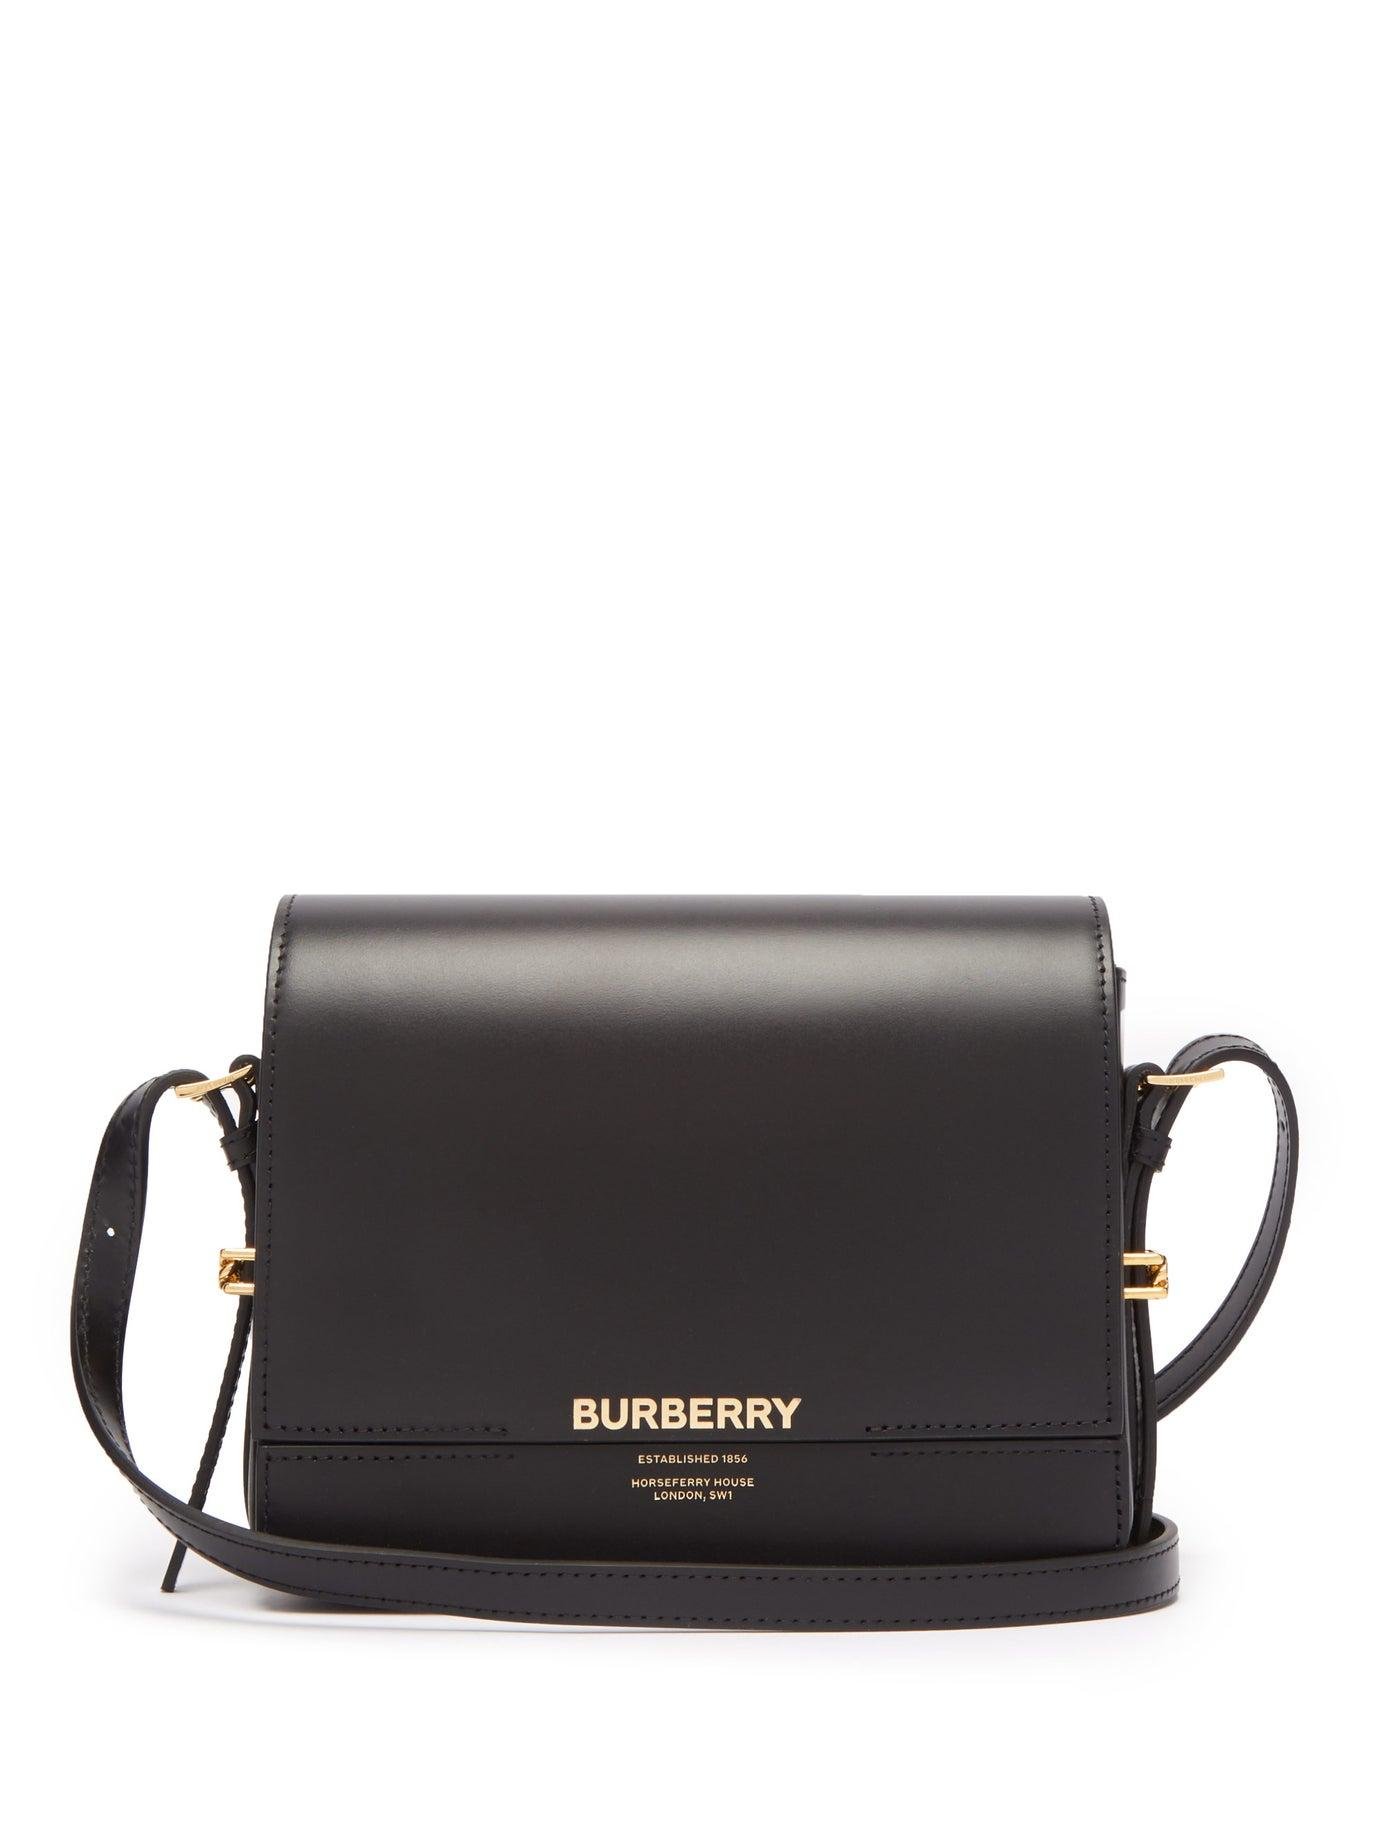 Burberry Grace Small Leather Shoulder Bag | Lyst